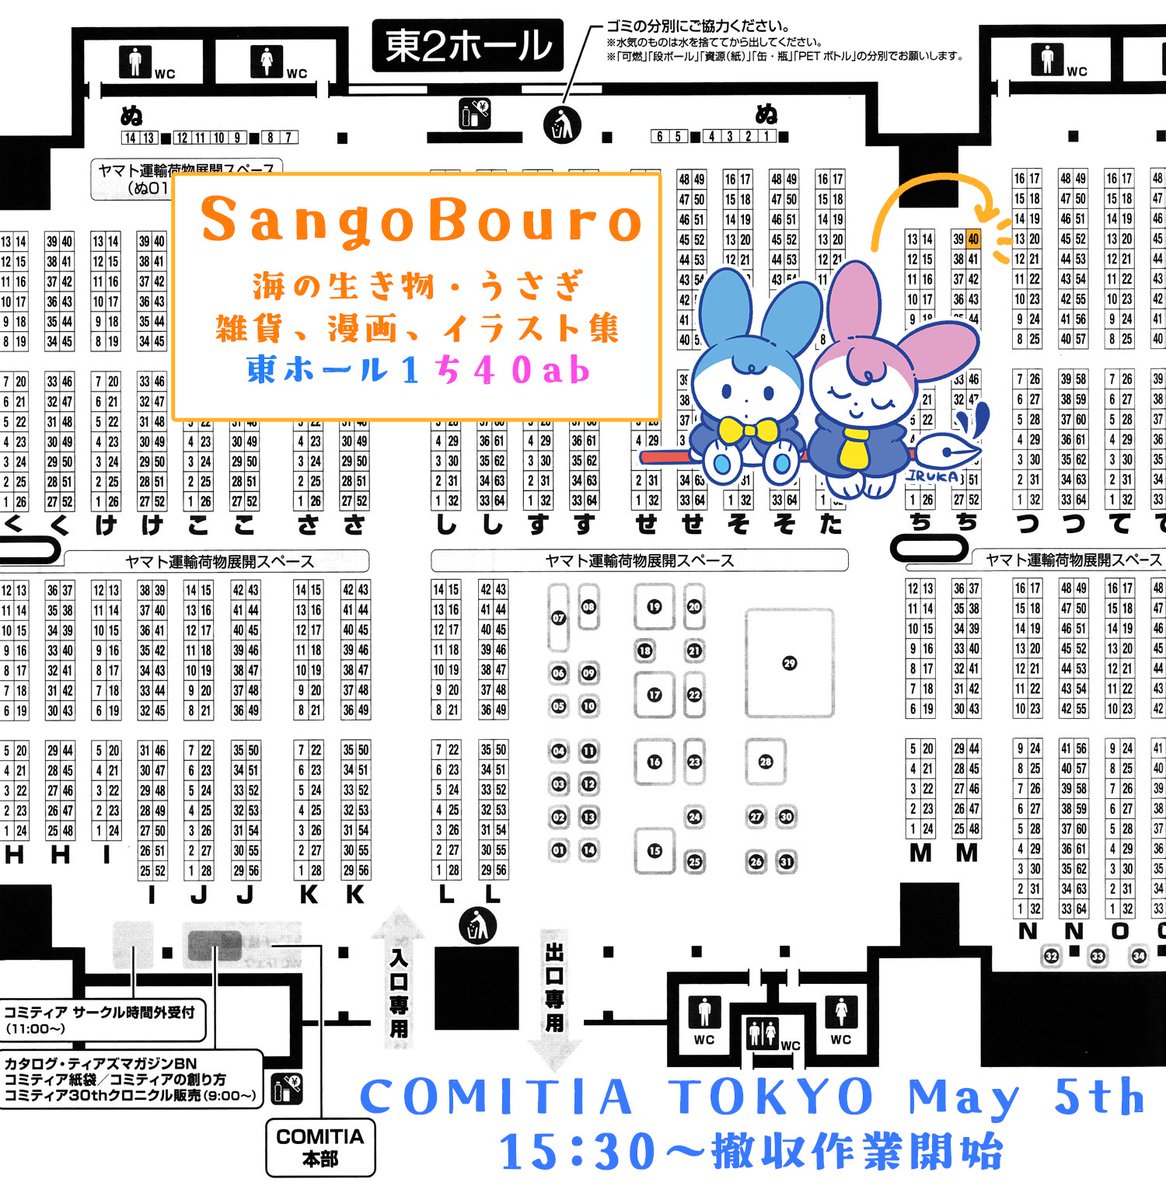 【Information of event participation] I'll participate in the committee on May 5th! Two new zines (watercolor manga, art book) and two ocs yuri manga are available. I have a lot of miscellaneous goods, so please take a look! Sango Bouro : East Hall 1・ち40ab #COMITIA144 #COMITIA